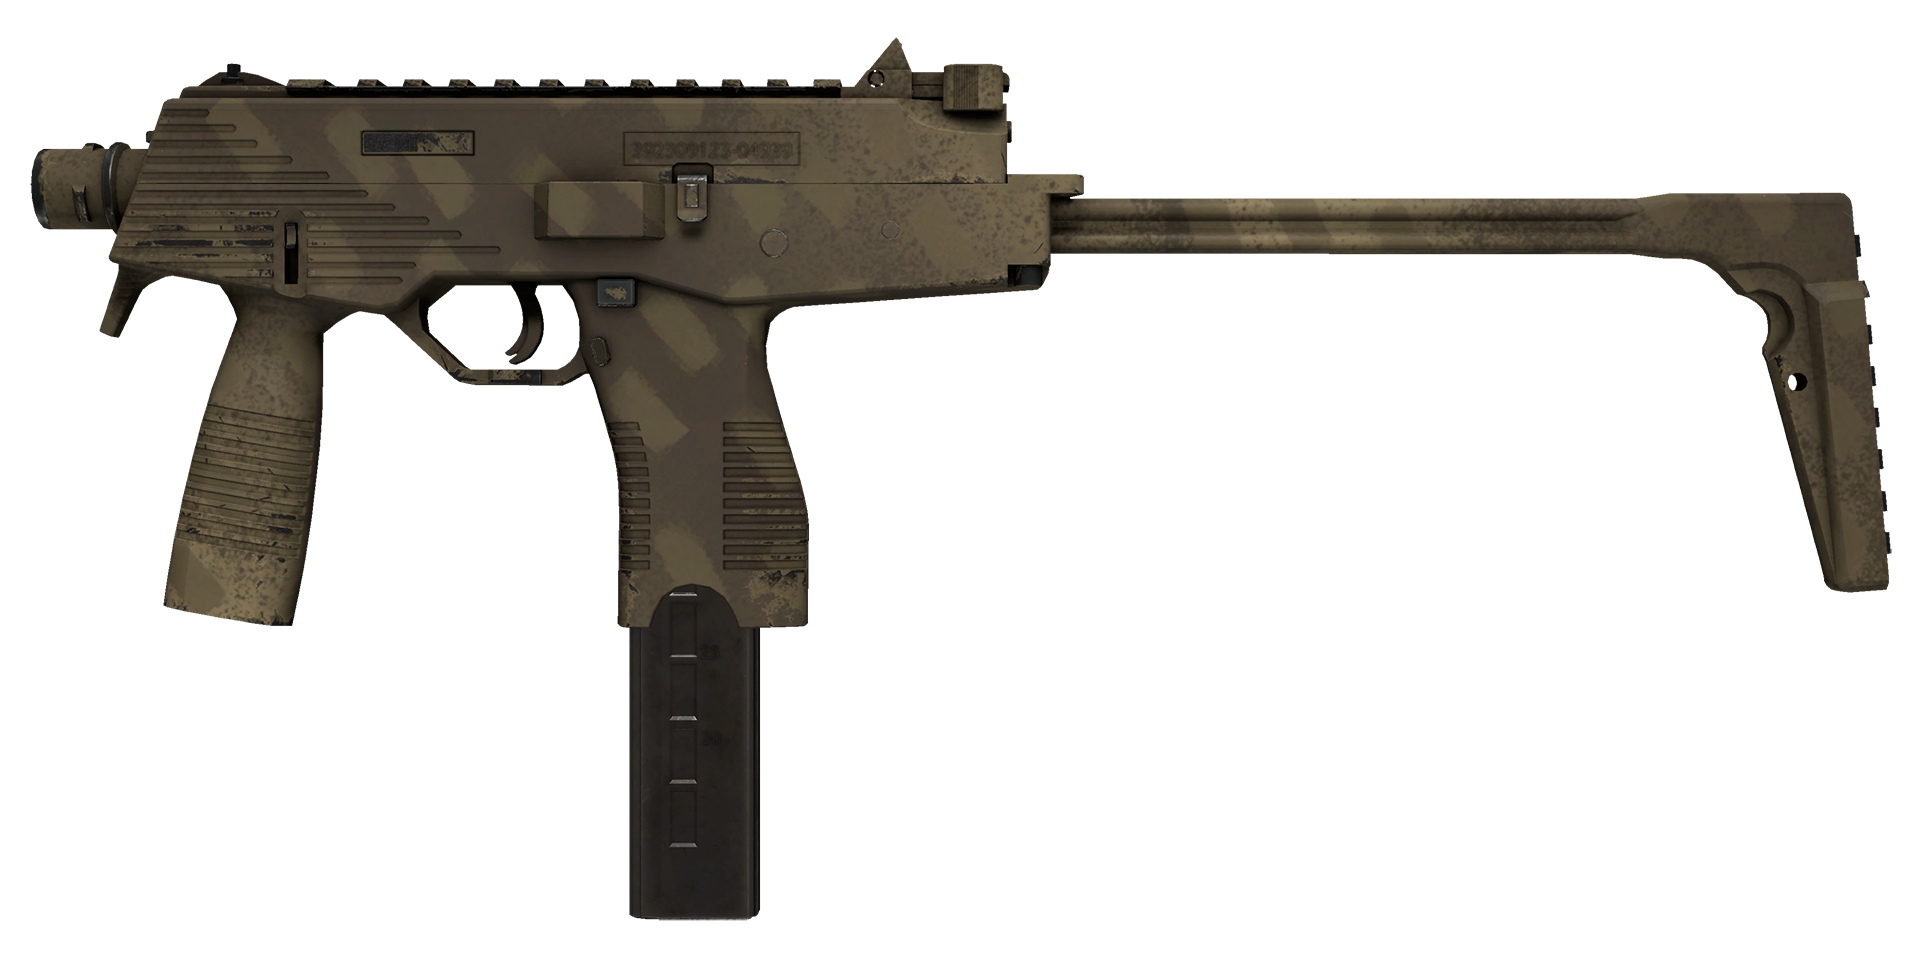 PP-Bizon Sand Dashed cs go skin instal the new for apple